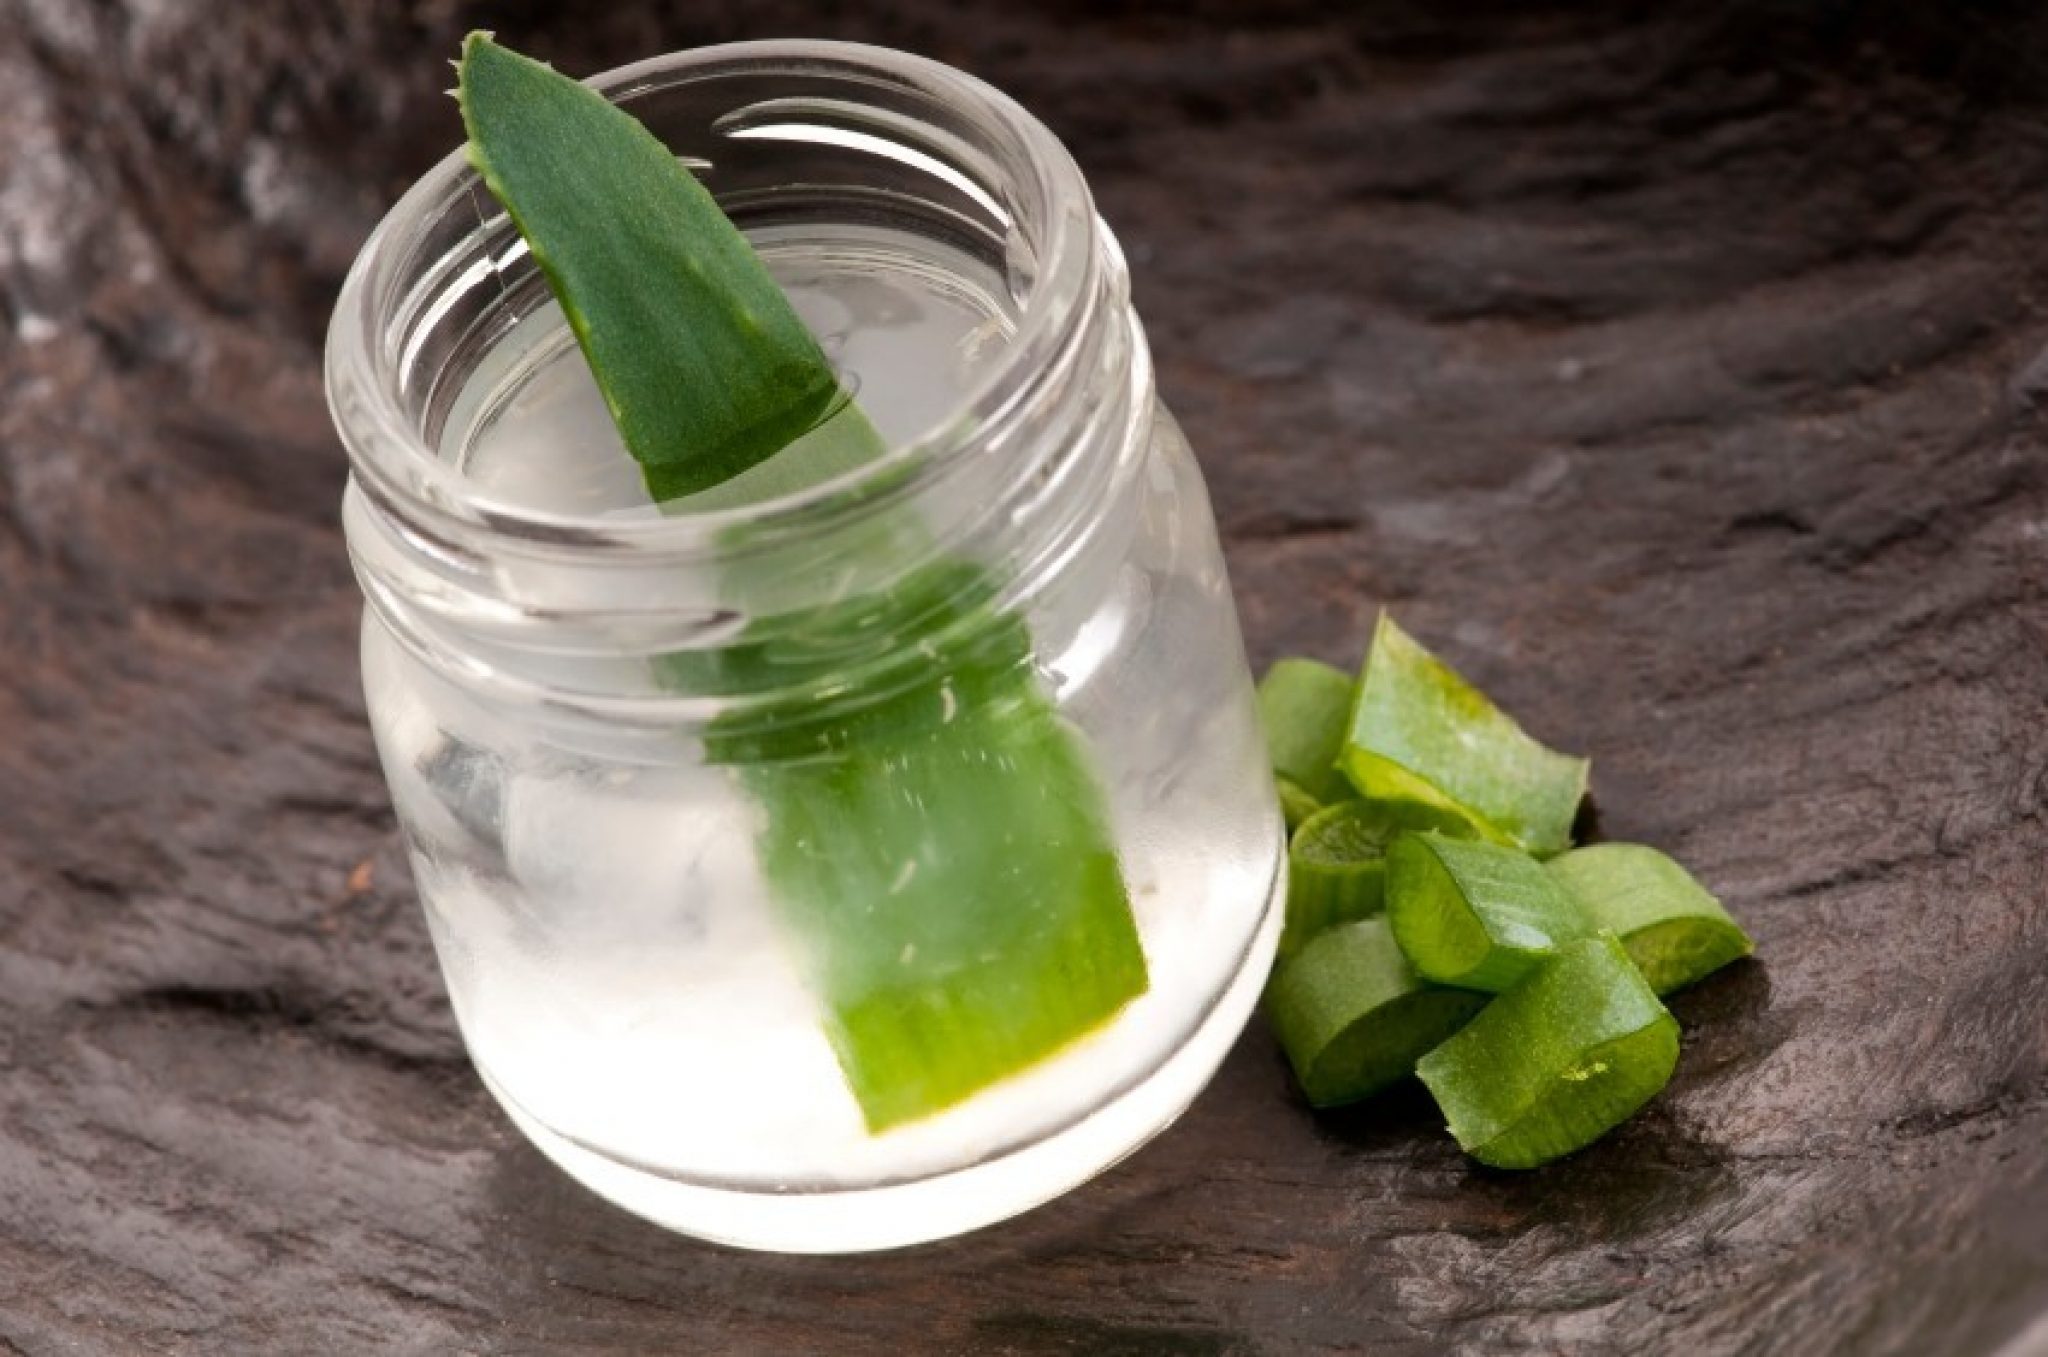 Can Aloe Vera Juice Help Clear Skin and Aid Weight Loss